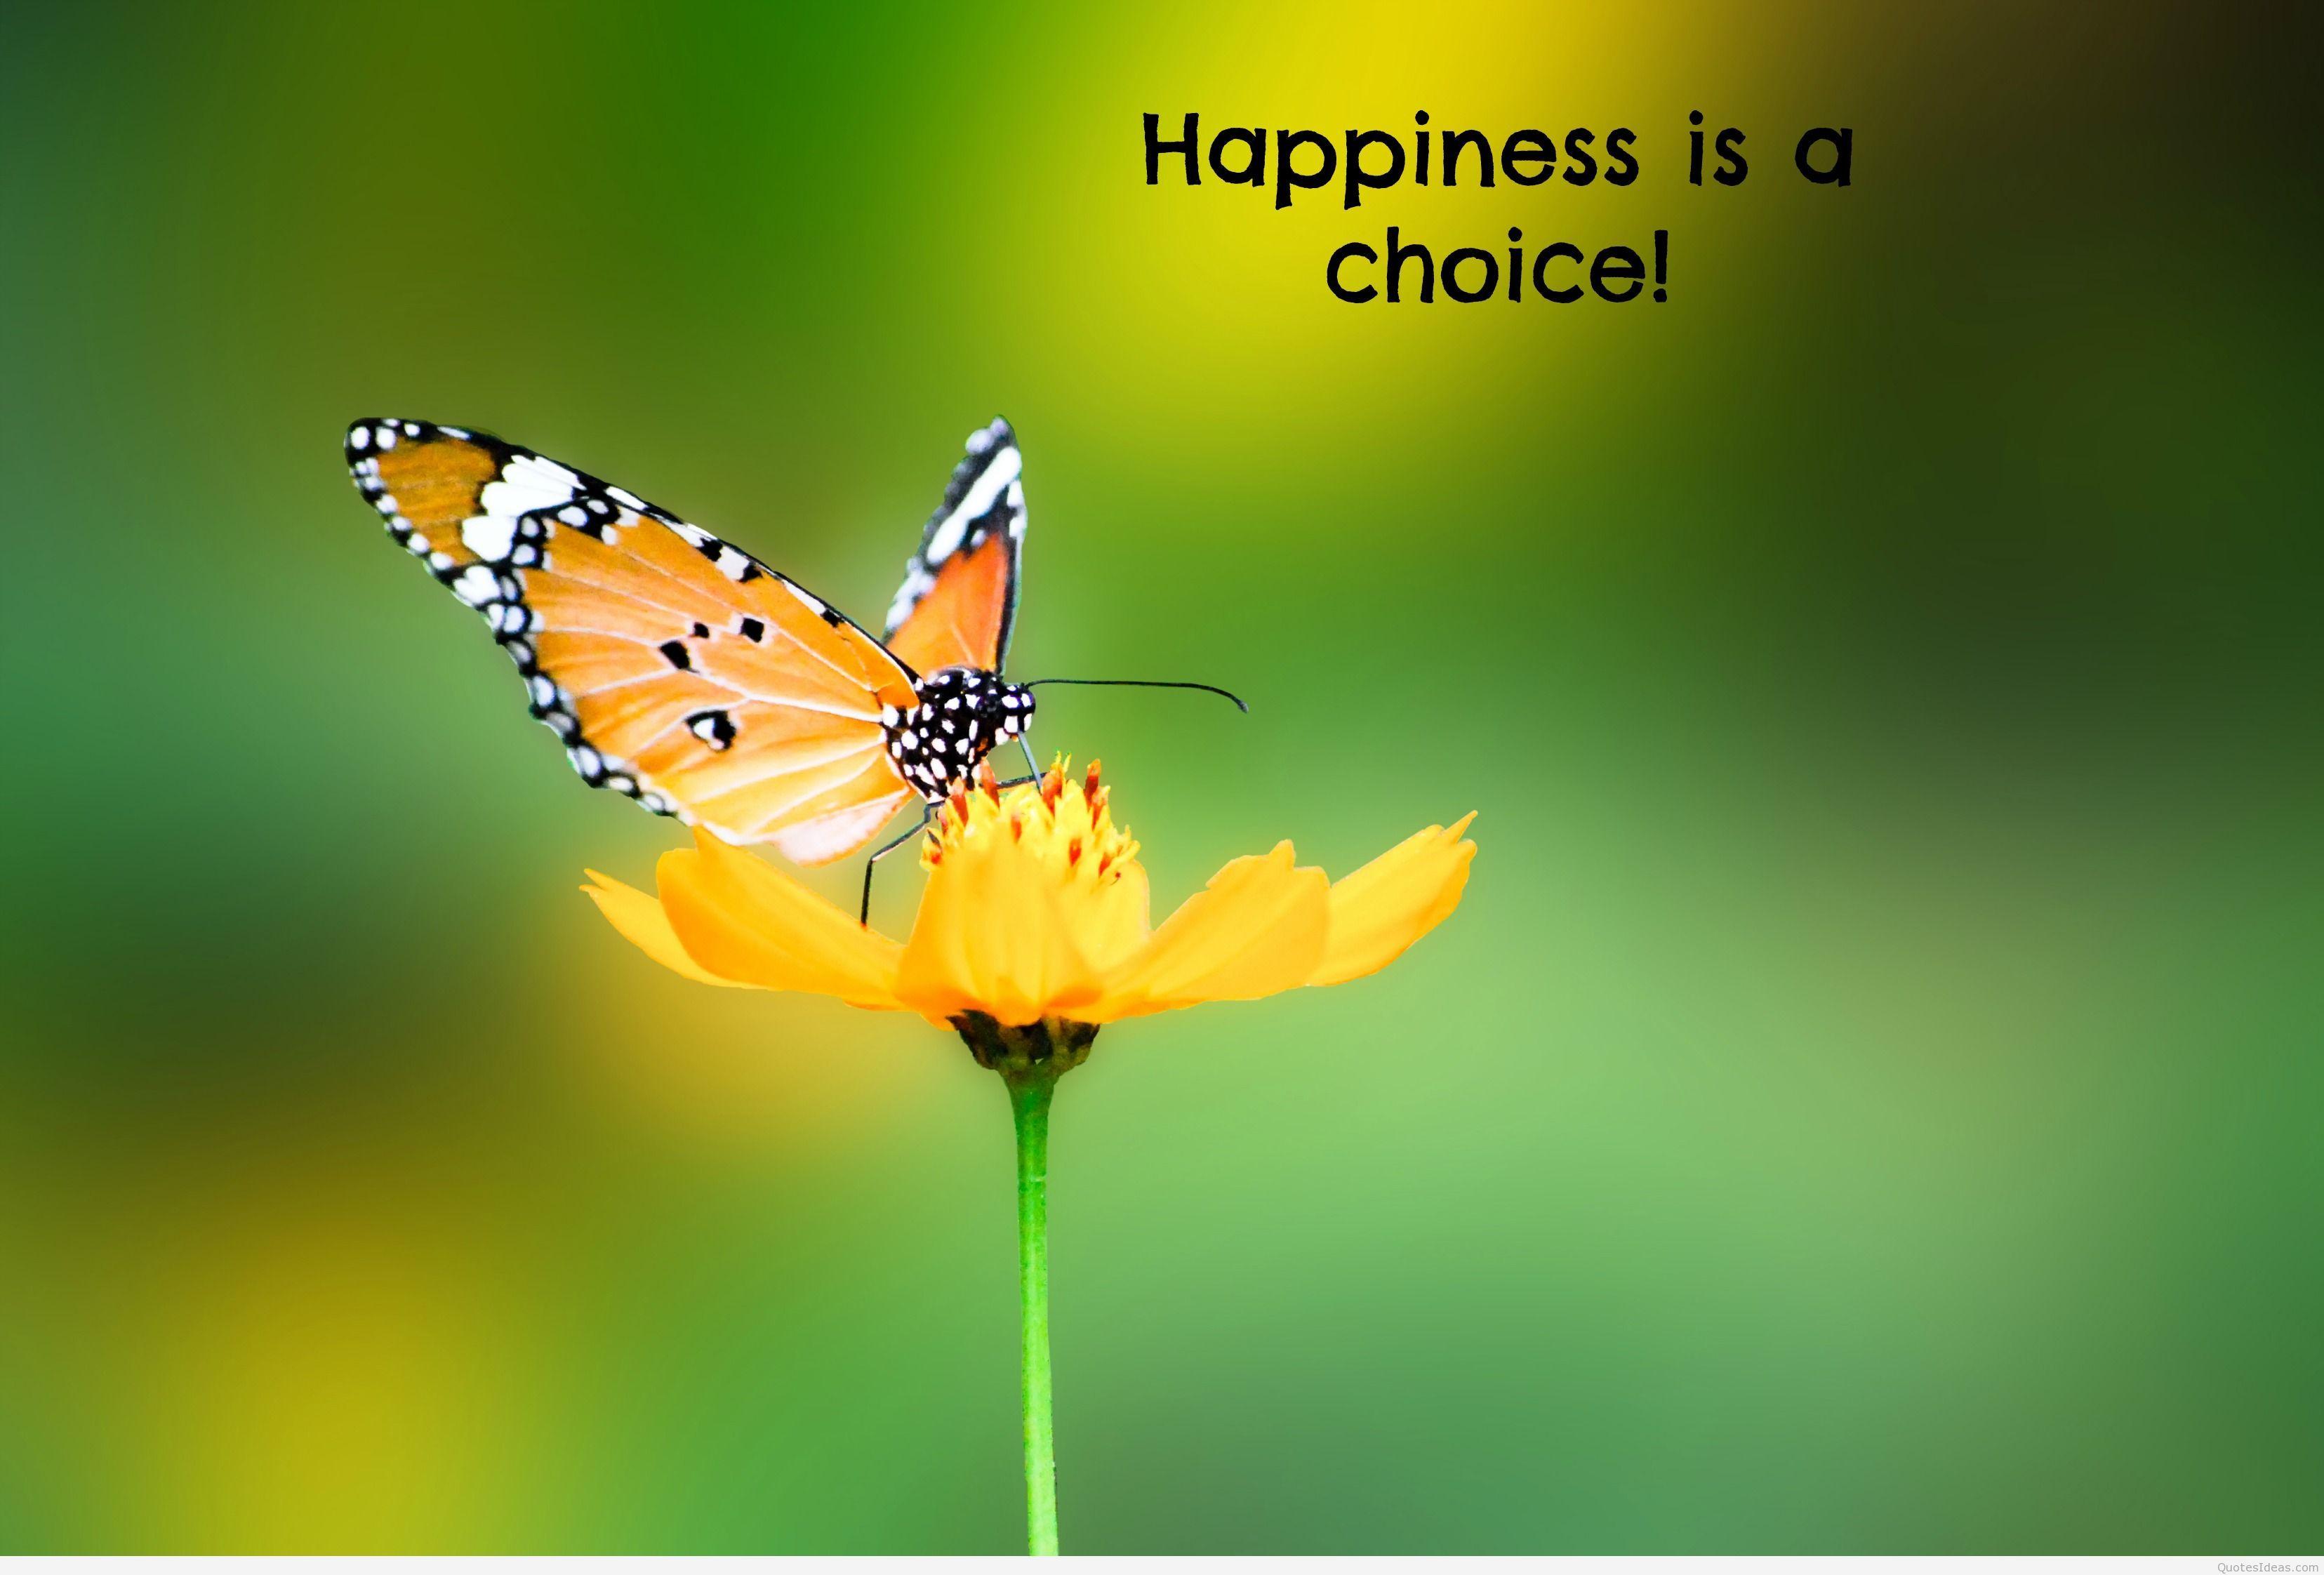 Happiness quotes background and image 2015 2016